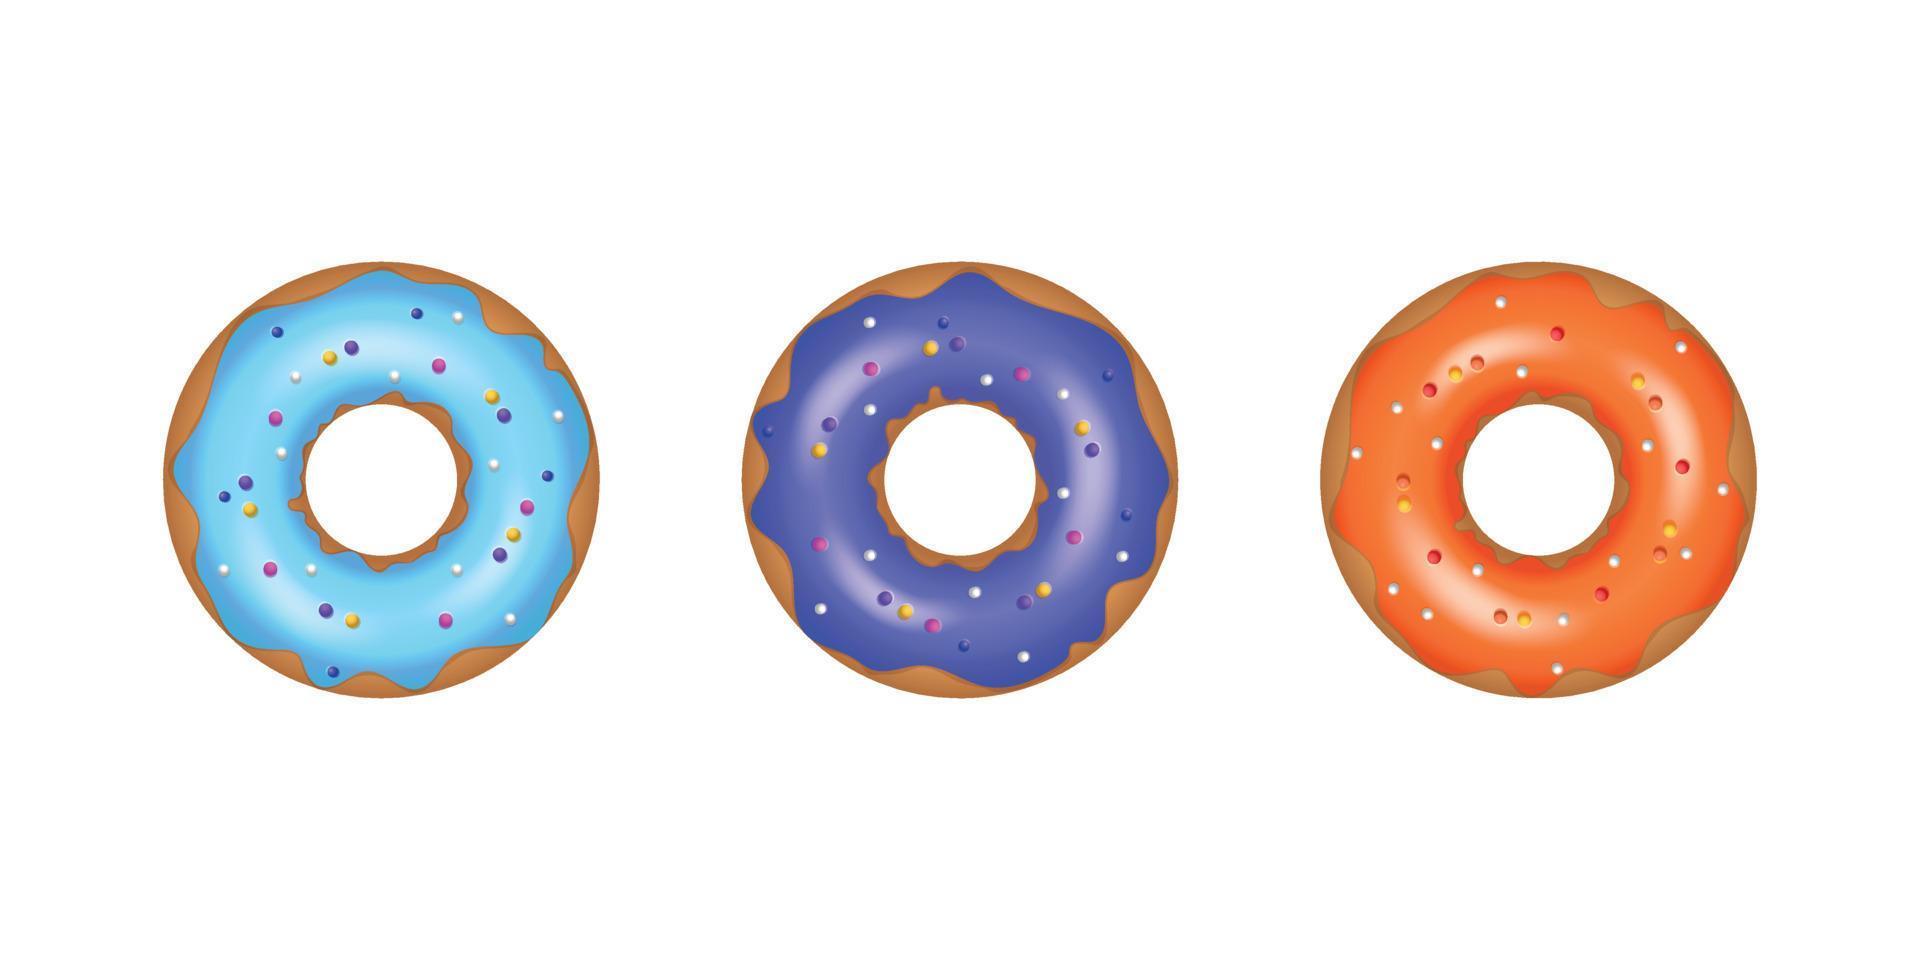 Set of cartoon colorful donuts. Bright delicious sweet doughnut with sugar caramel colored glaze and decorated with colorful decorative elements. Sinker for menu design, cafe decoration, delivery. vector